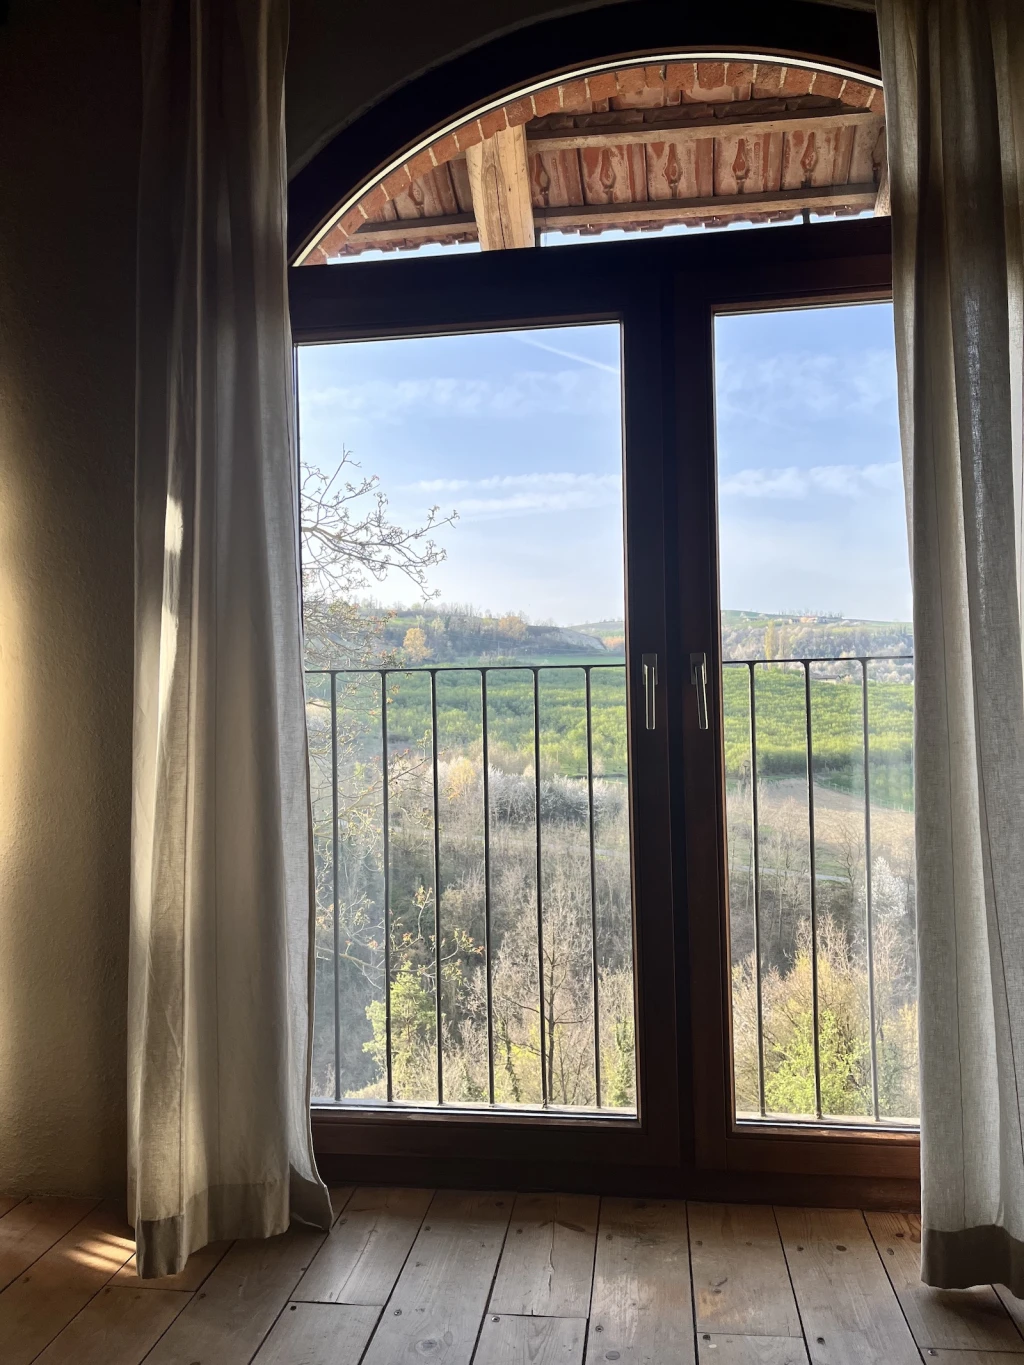 Gorgeous views over the Piemonte countryside from the moment you wake up